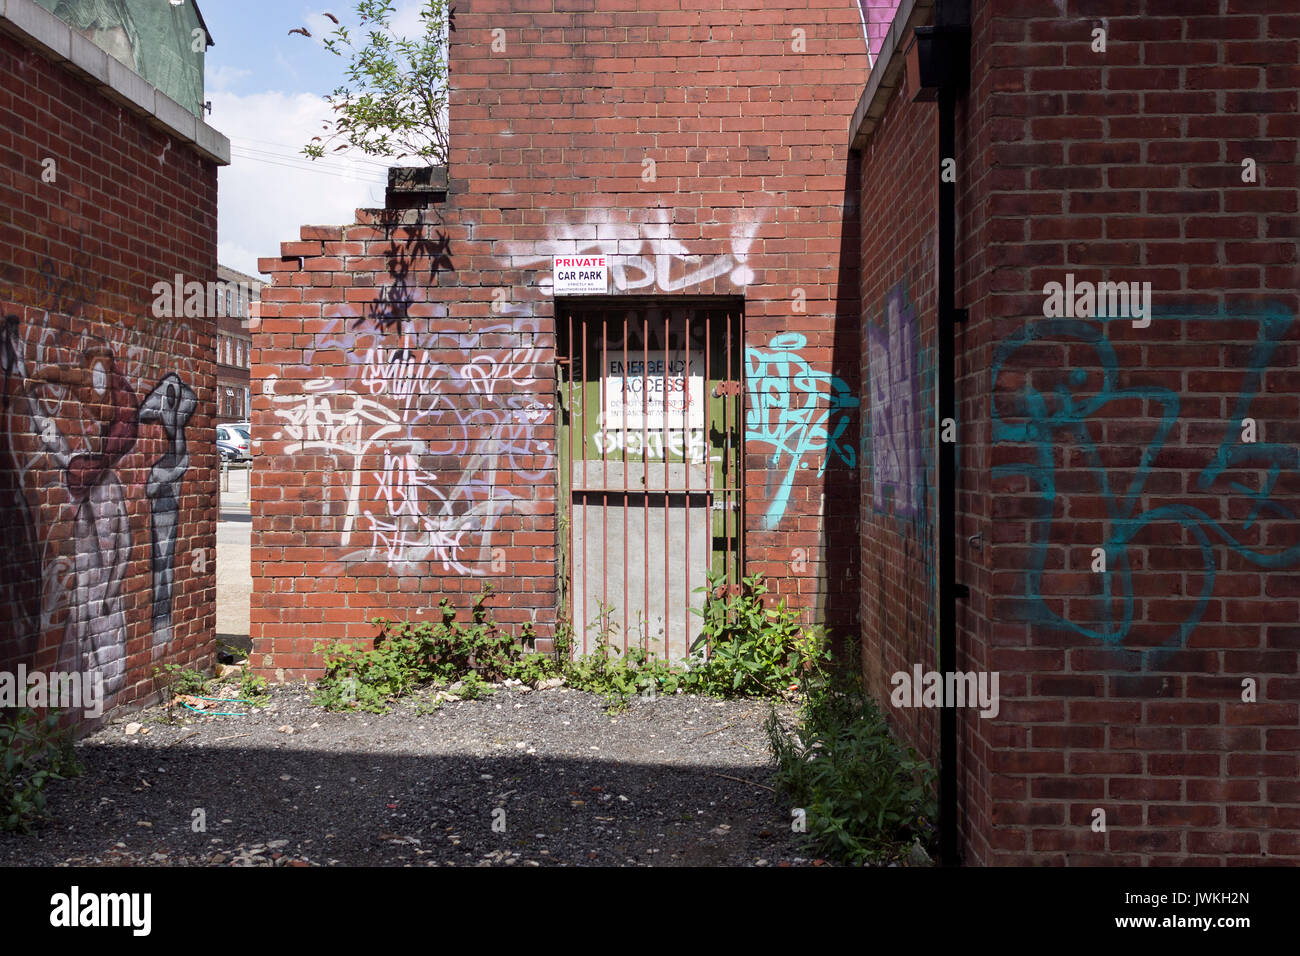 Abandoned Building, Derelict, Deserted, Brick Exterior, Graffiti, Debris, Weeds, Sealed Off, Iron Gate, Rundown, Secured, No Entry, Discarded, Writing Stock Photo